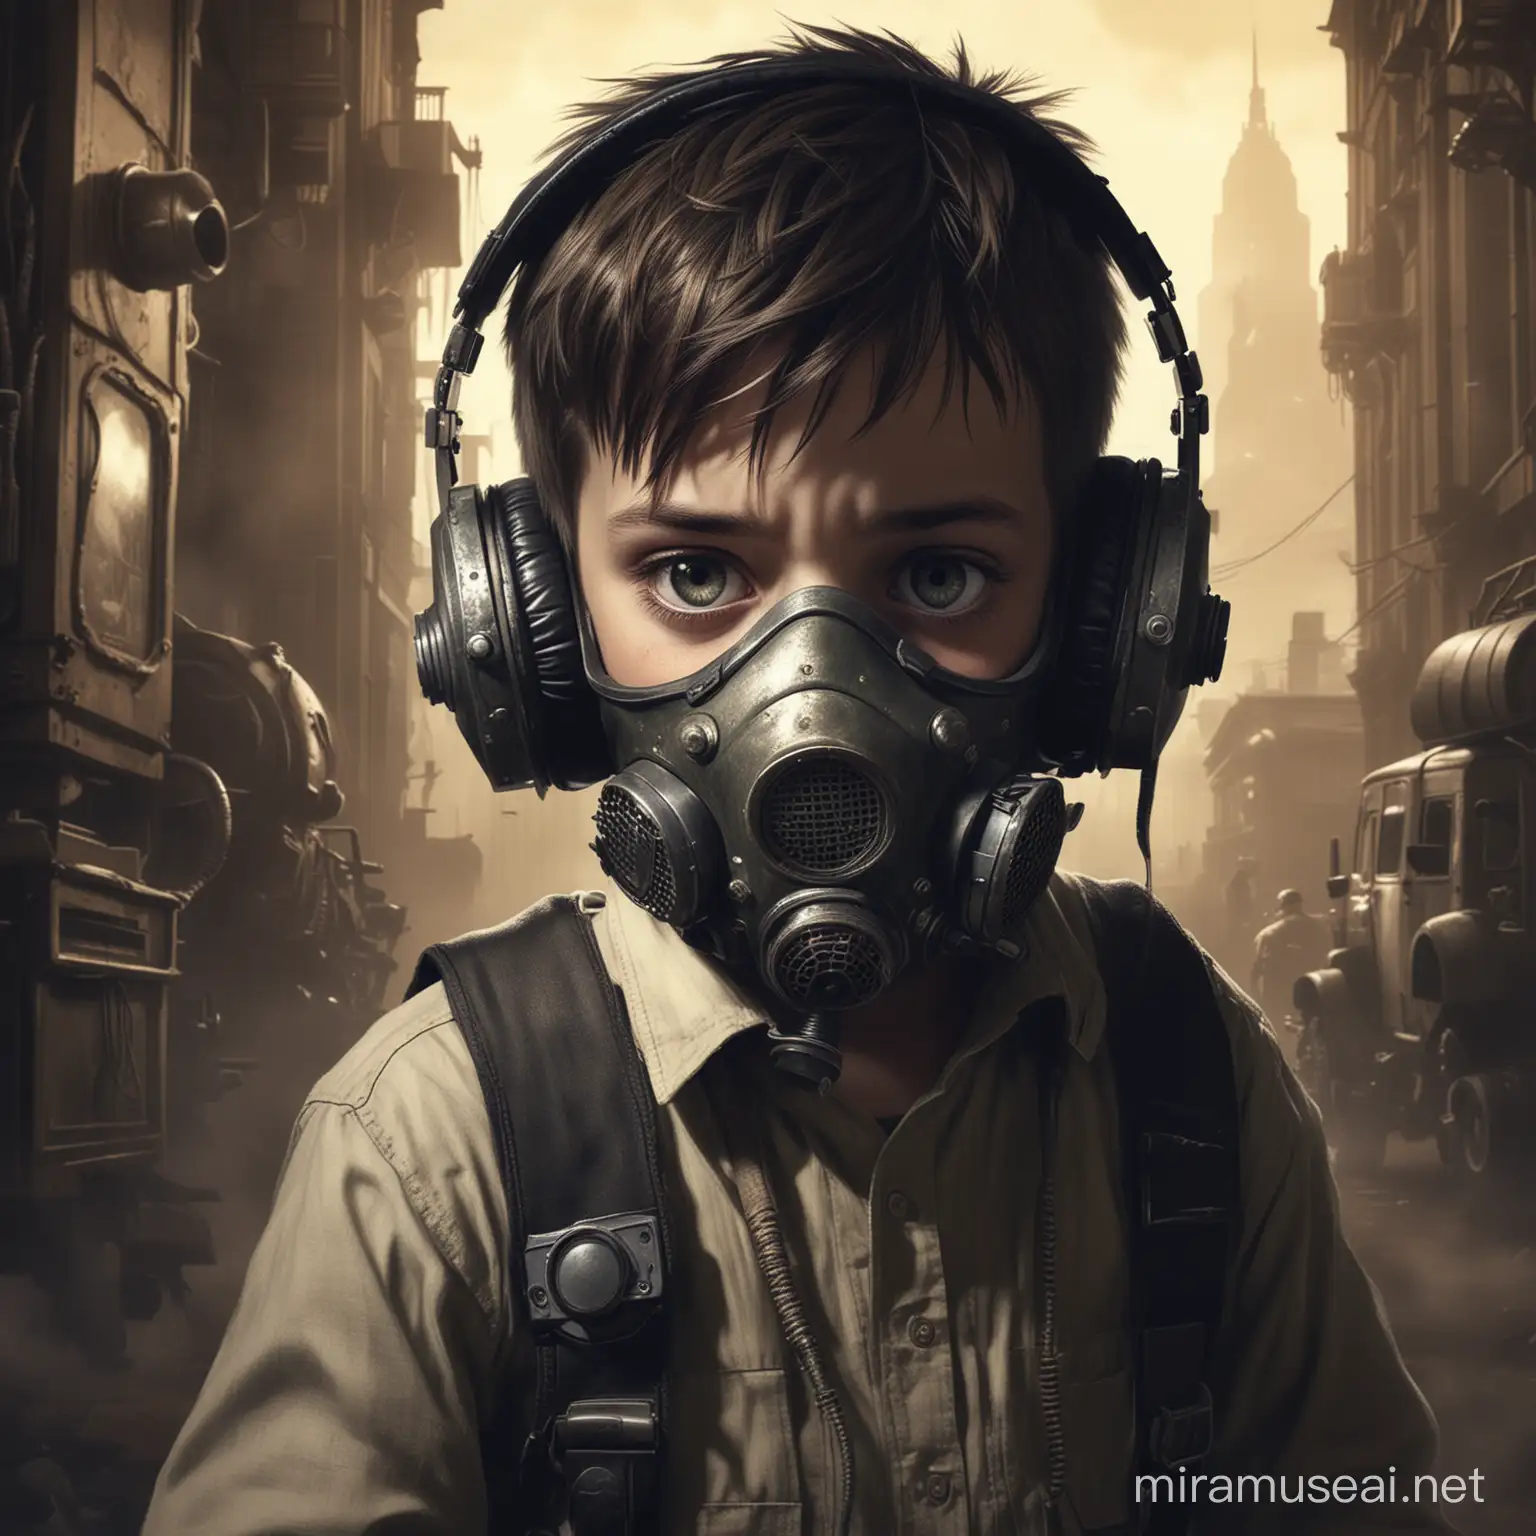 Child in PostApocalyptic Wasteland Heavy Metal and High Tech